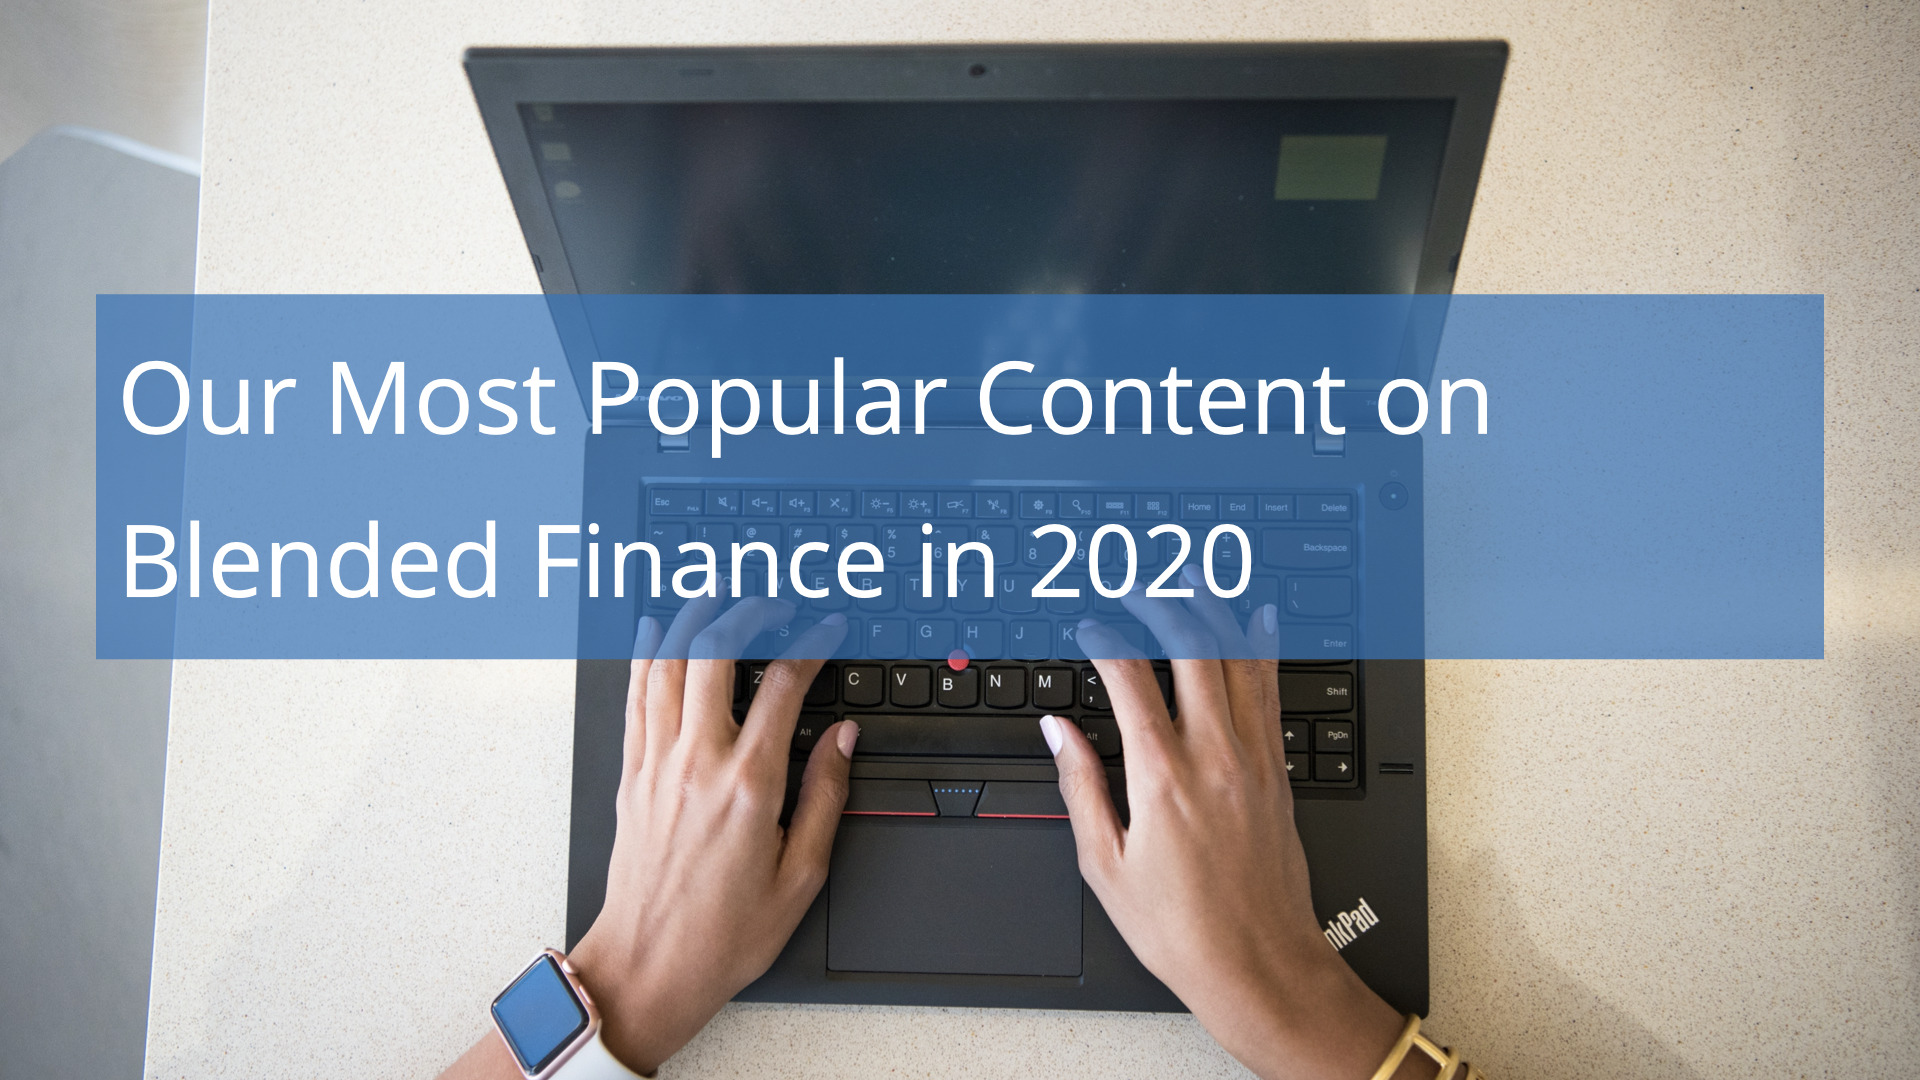 Our Most Popular Content on Blended Finance in 2020